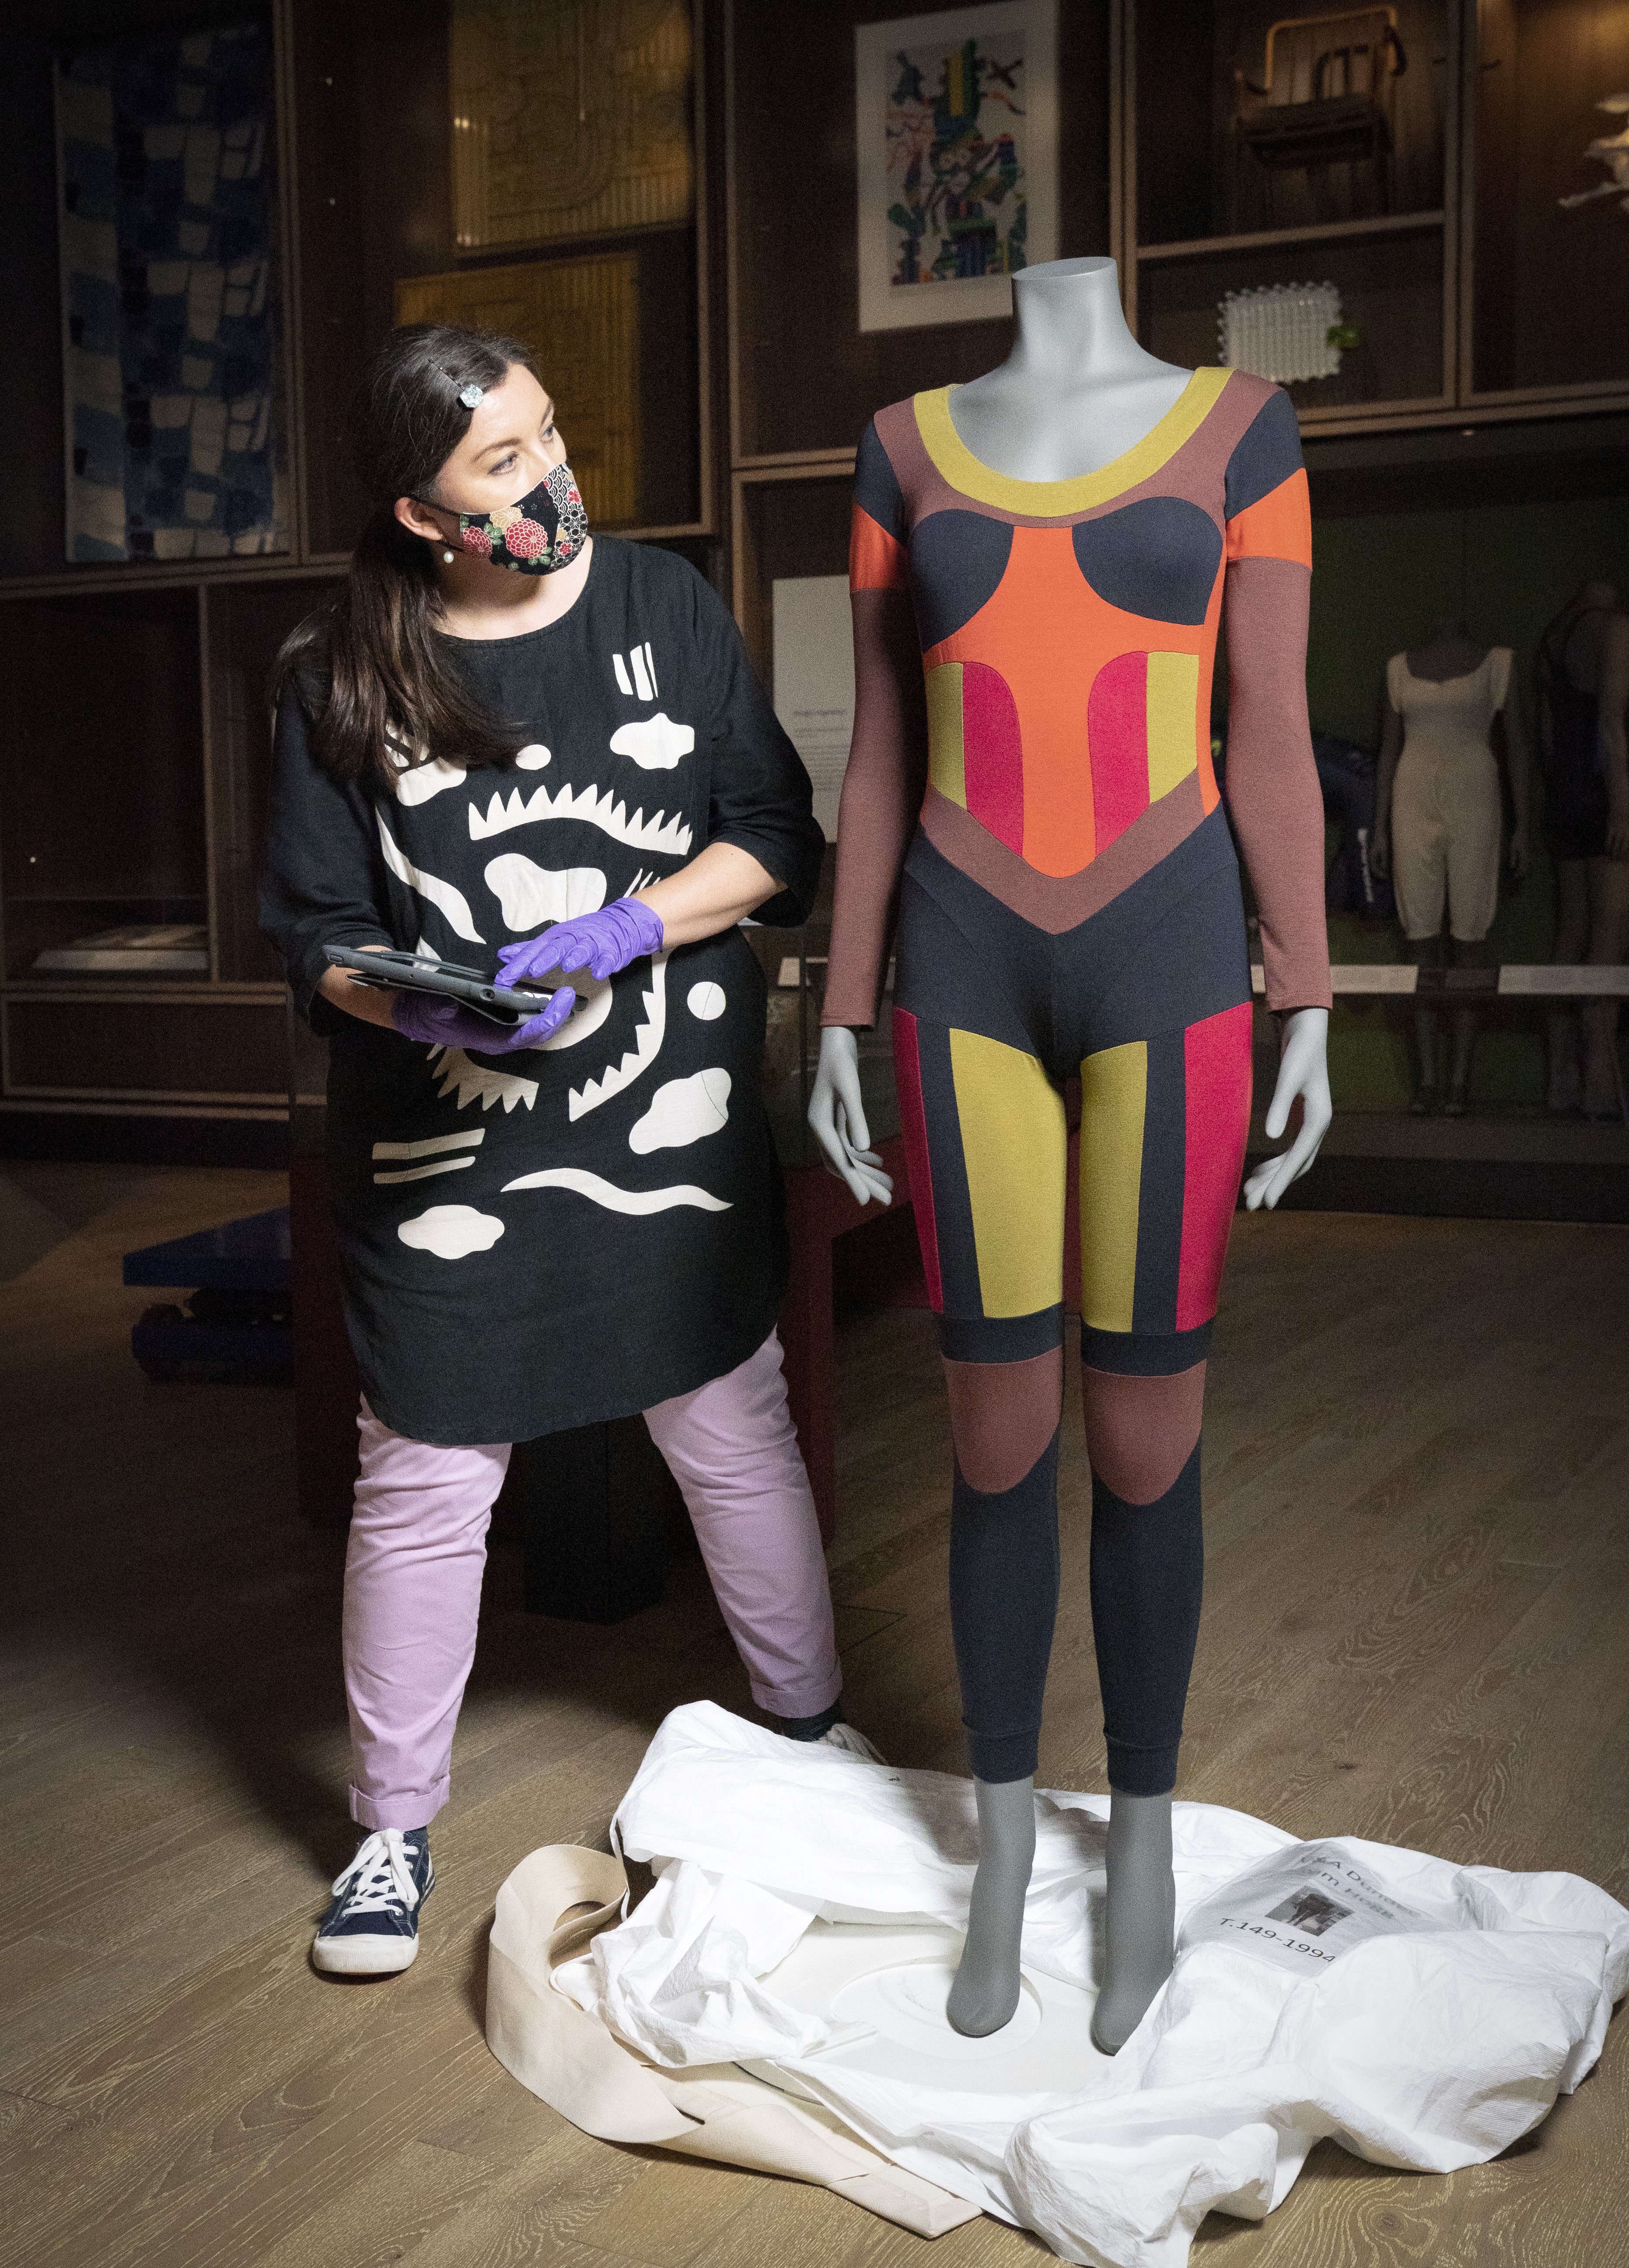 Lead textile conservator Elizabeth Anne Haldane carries out a condition check on a multicoloured bodysuit by designer Pam Hogg before going on display in the Scottish Design Galleries at the V&A in Dundee. 